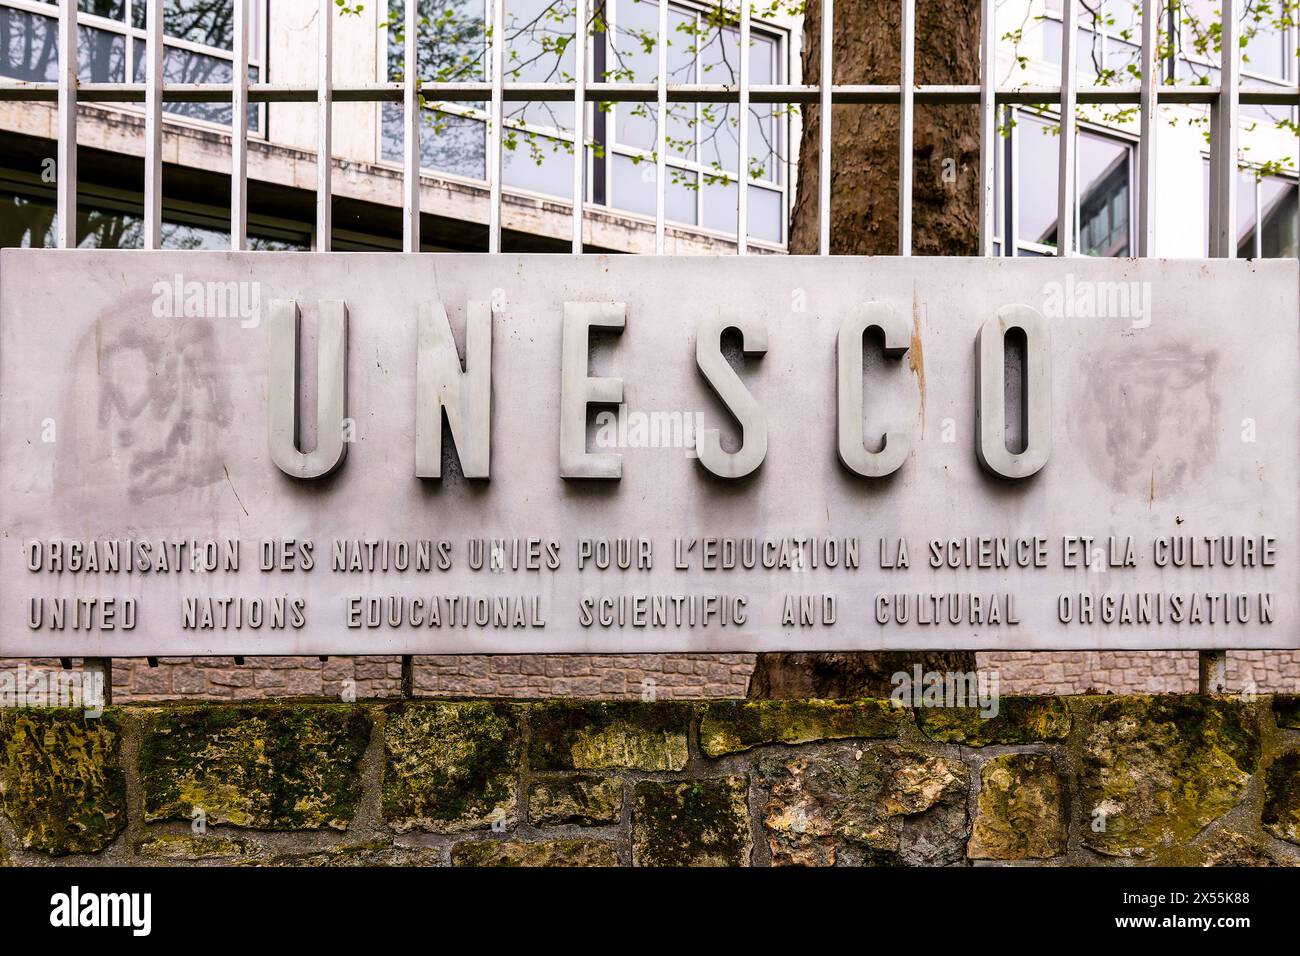 UNESCO (United Nations Educational Scientific and Cultural Organization) sign and headquarters building  in Paris, France Stock Photo